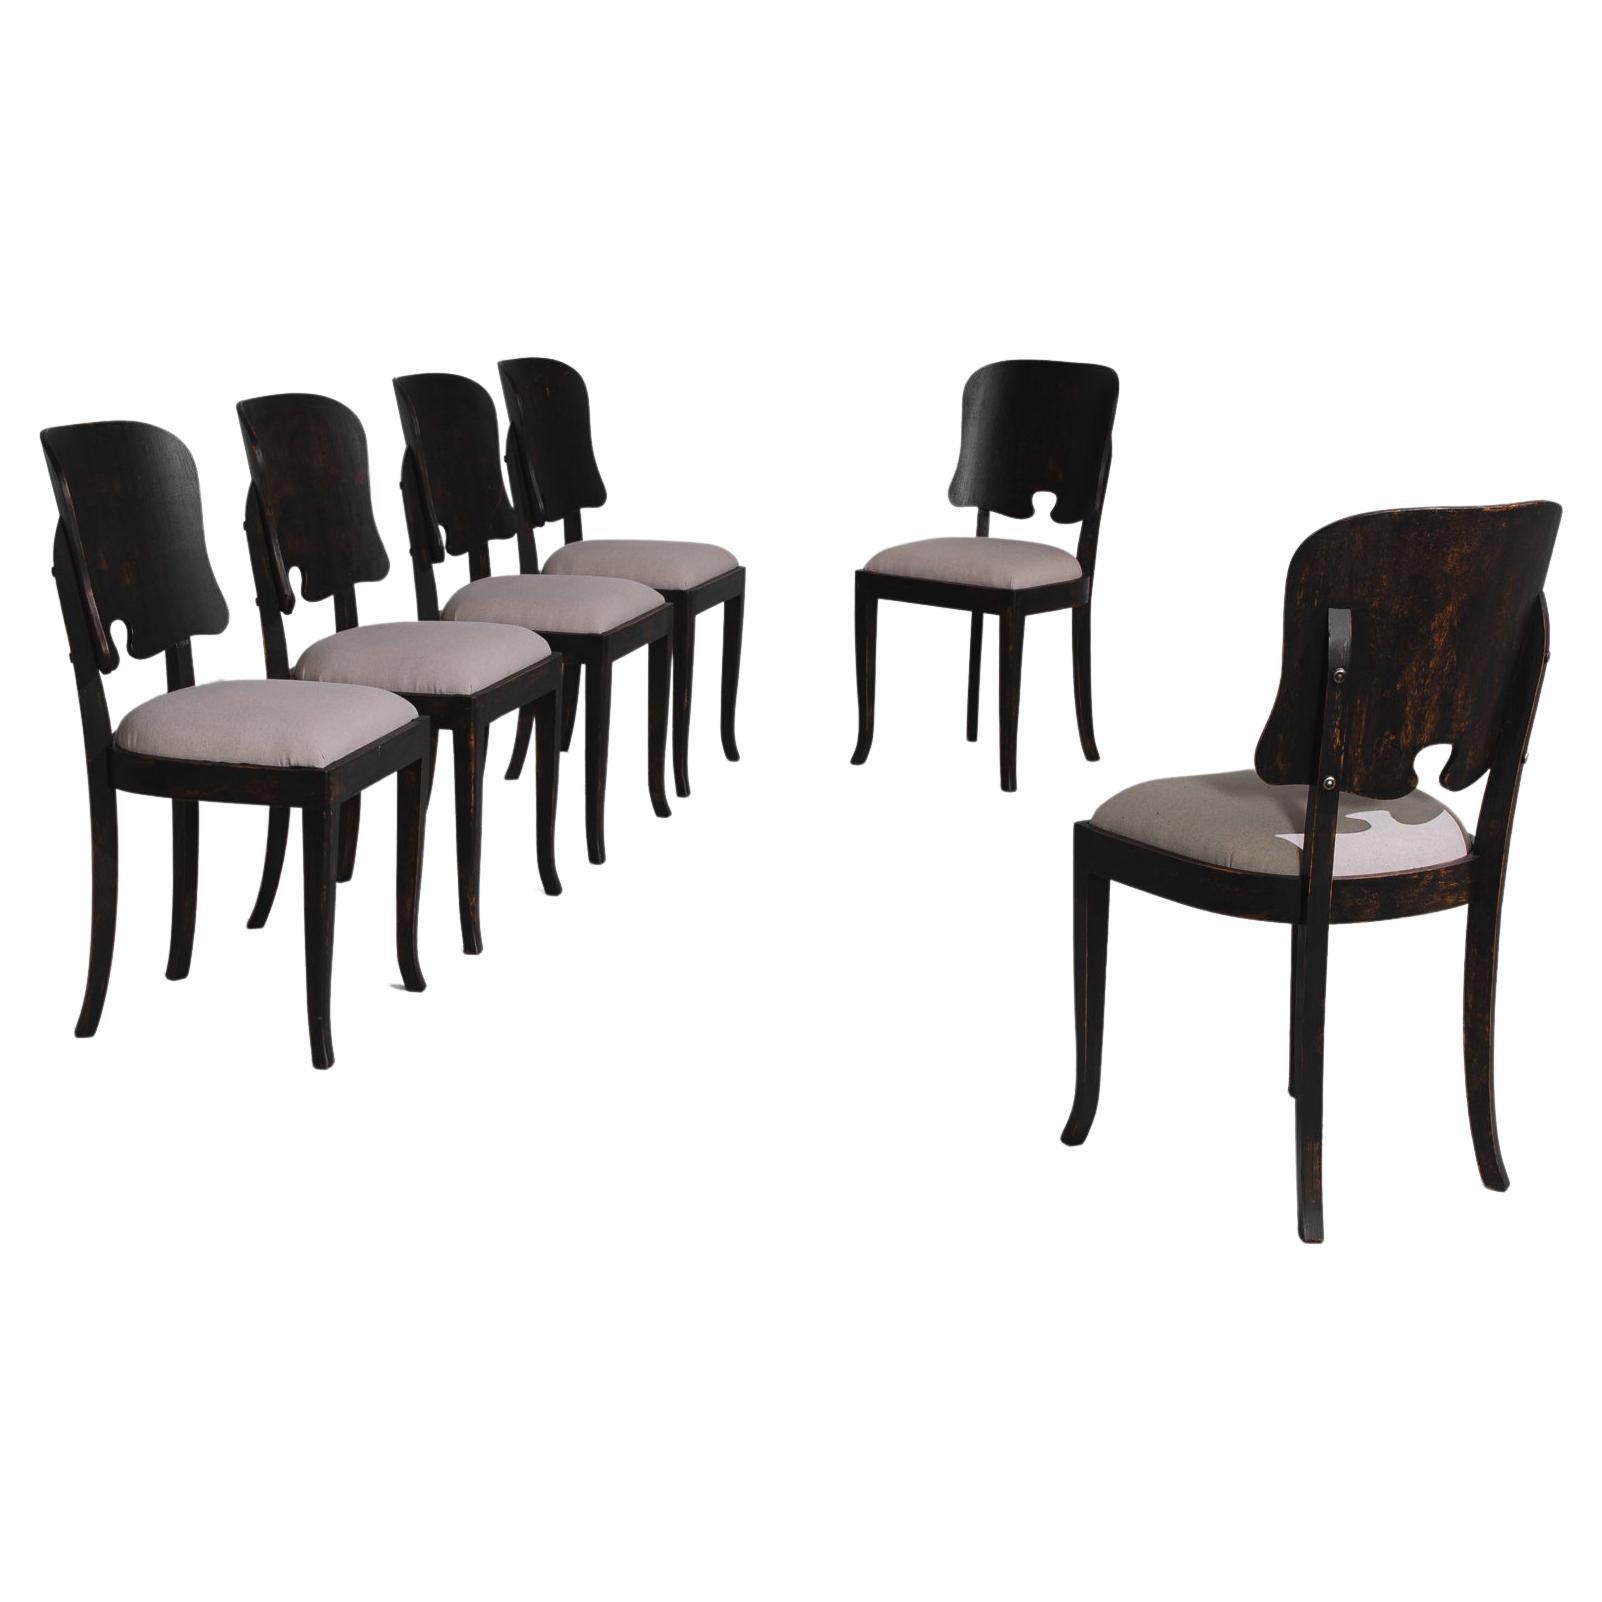 1950s Belgian Wooden Chairs with Upholstered Seats, Set of Six